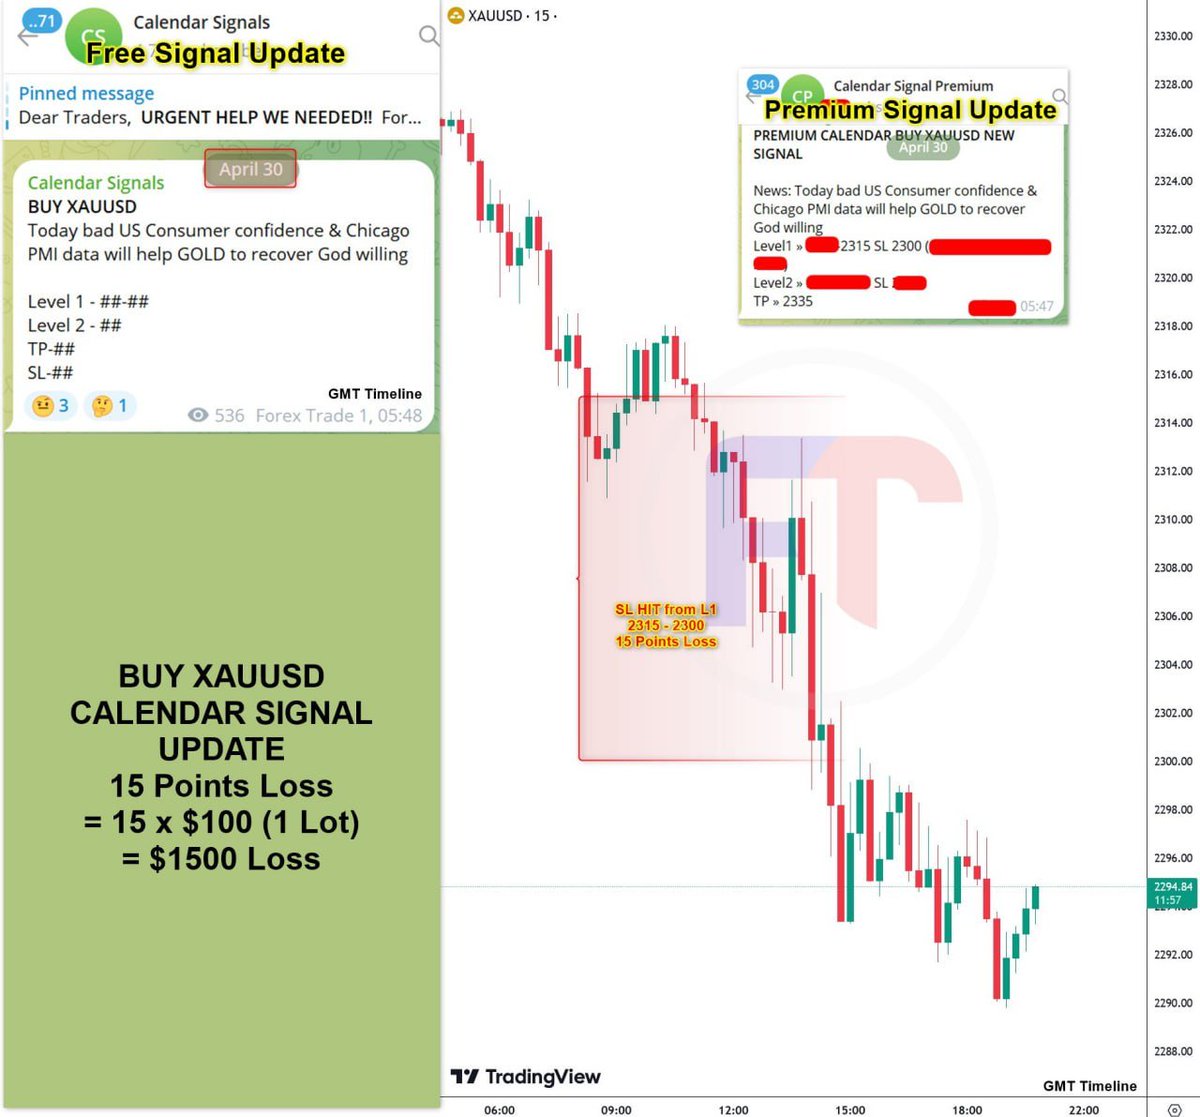 BUY XAUUSD CALENDAR BASED SIGNAL PERFORMANCE

Entry = 2315 | Exit = 2300 
= 15 Points Loss
=$1500 Loss

For calendar signal contact us now » @forextrader_19 
#Xauusdgold #GOLD #forexsignals #Forex3D #FXCore 
twitter.com/forextrader_19…